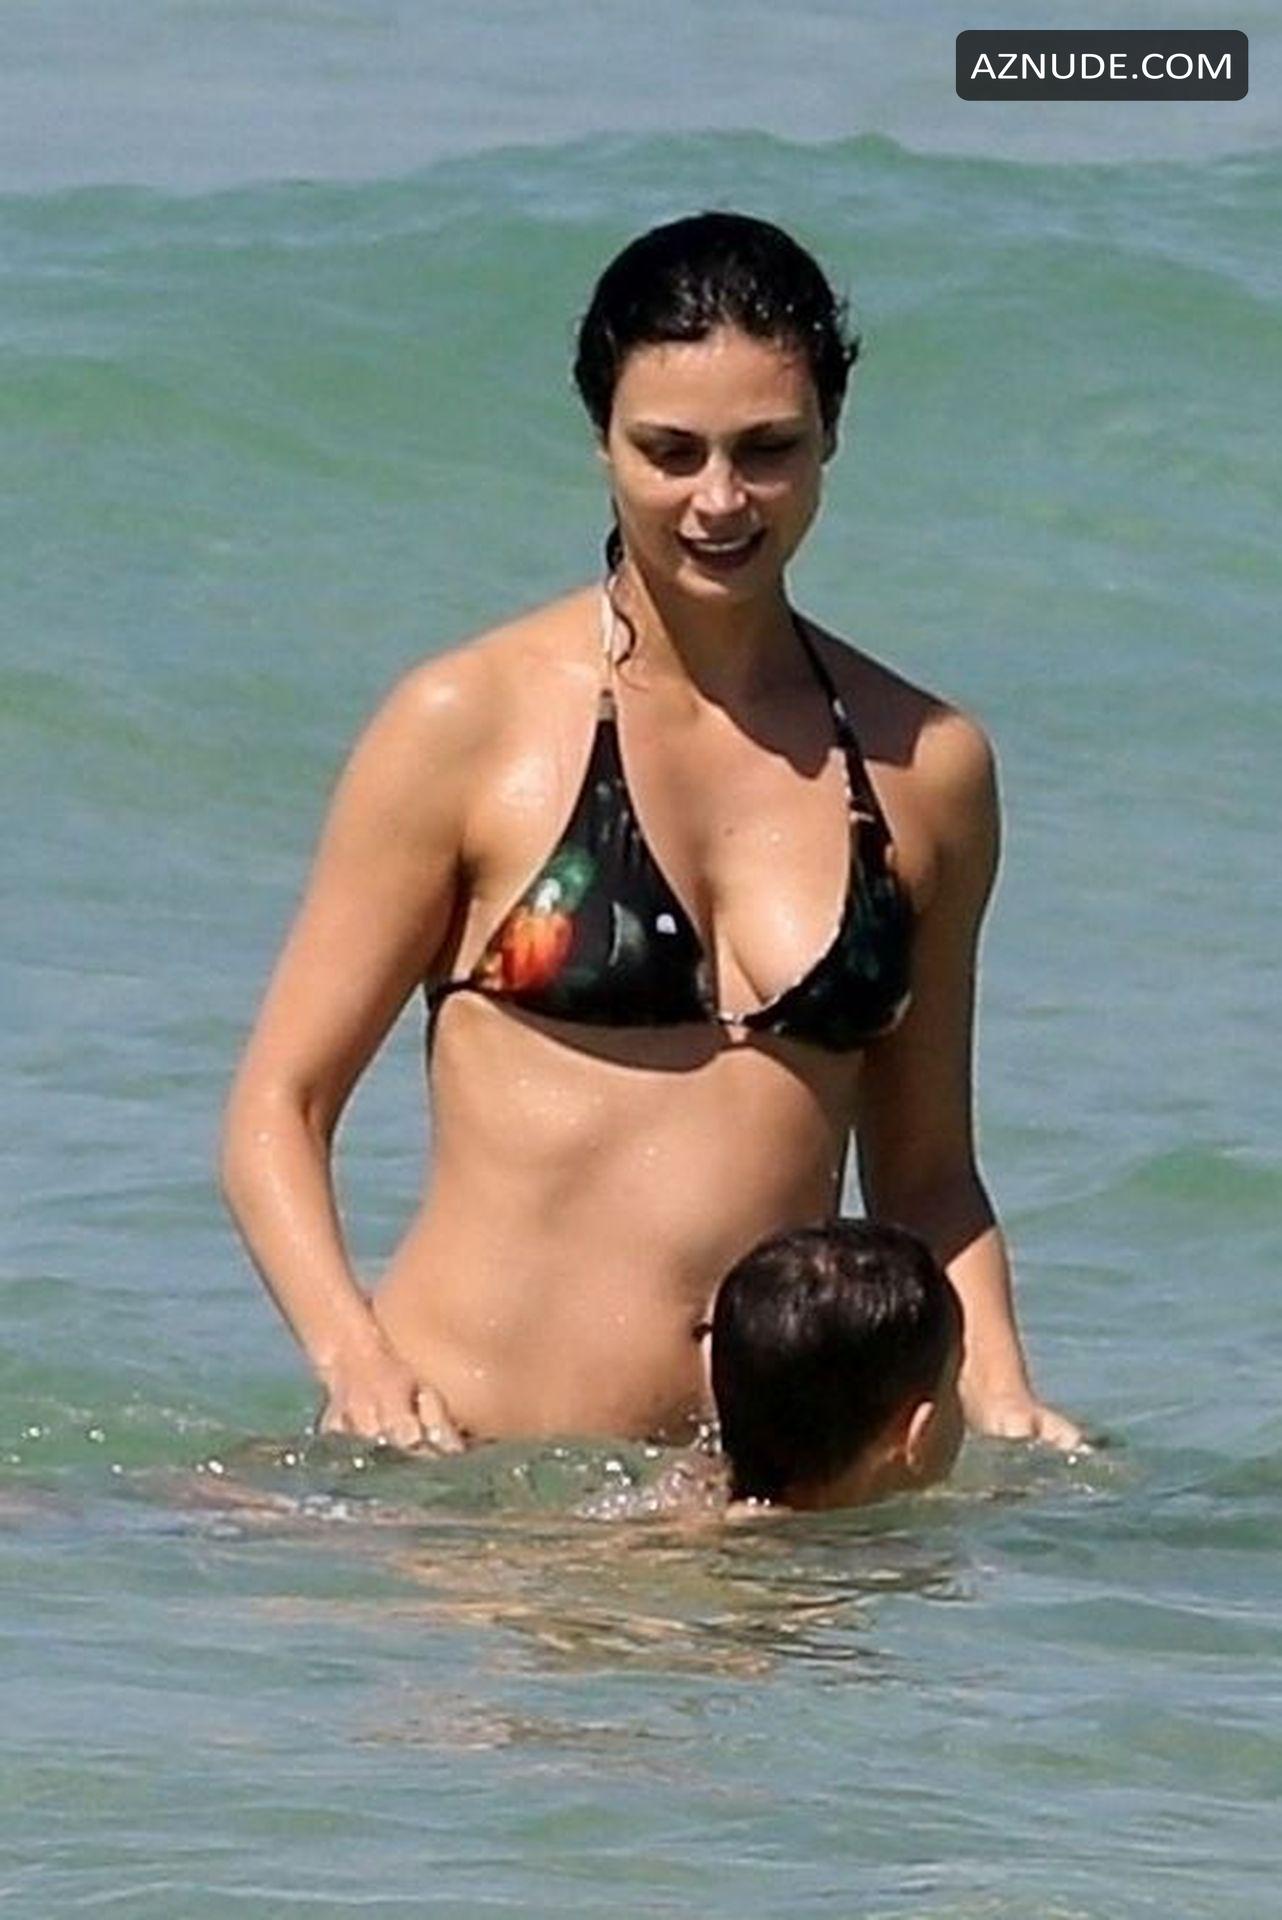 Morena Baccarin Sexy On The Beach With Her Husband Ben Mckenzie 03022019 Aznude